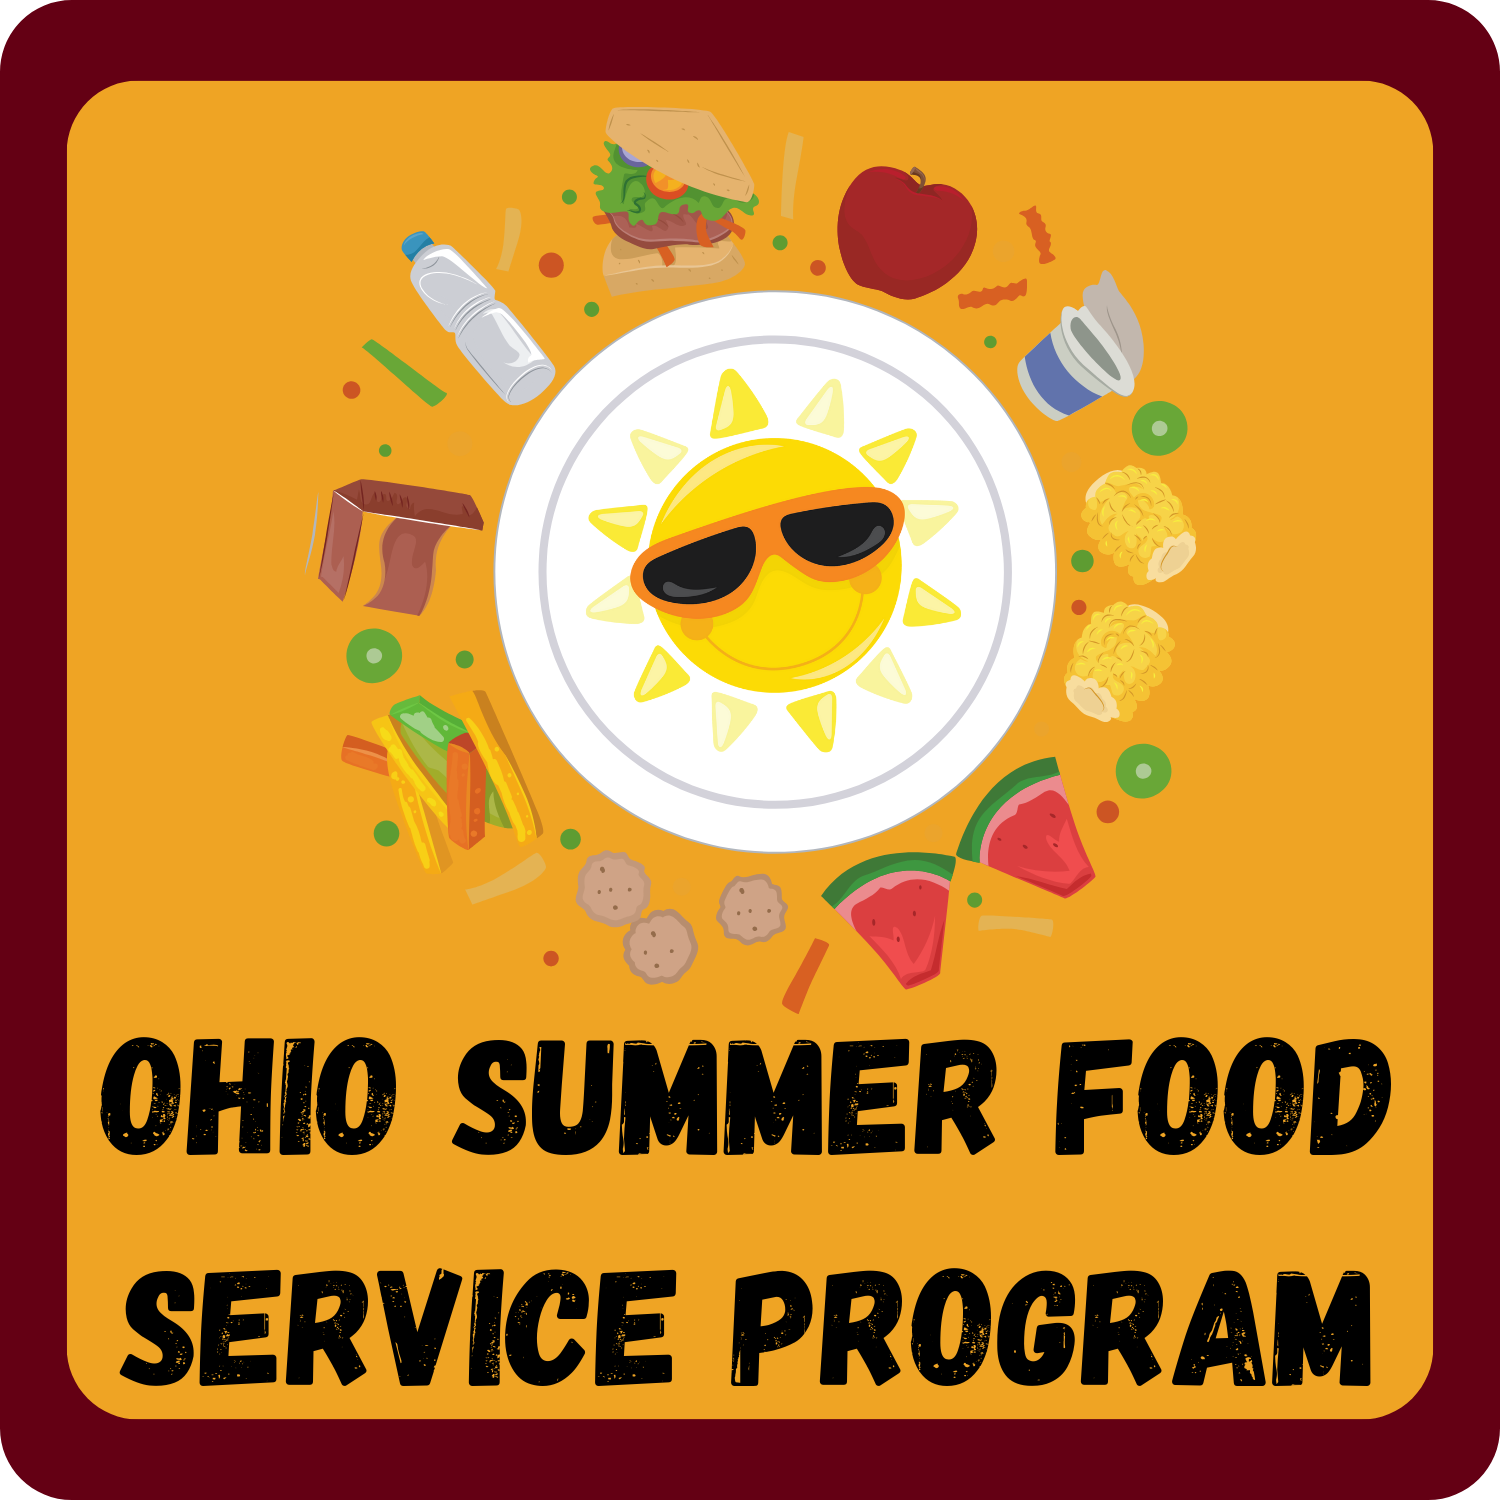 Ohio Summer Food Service Program (new site opens in new tab)